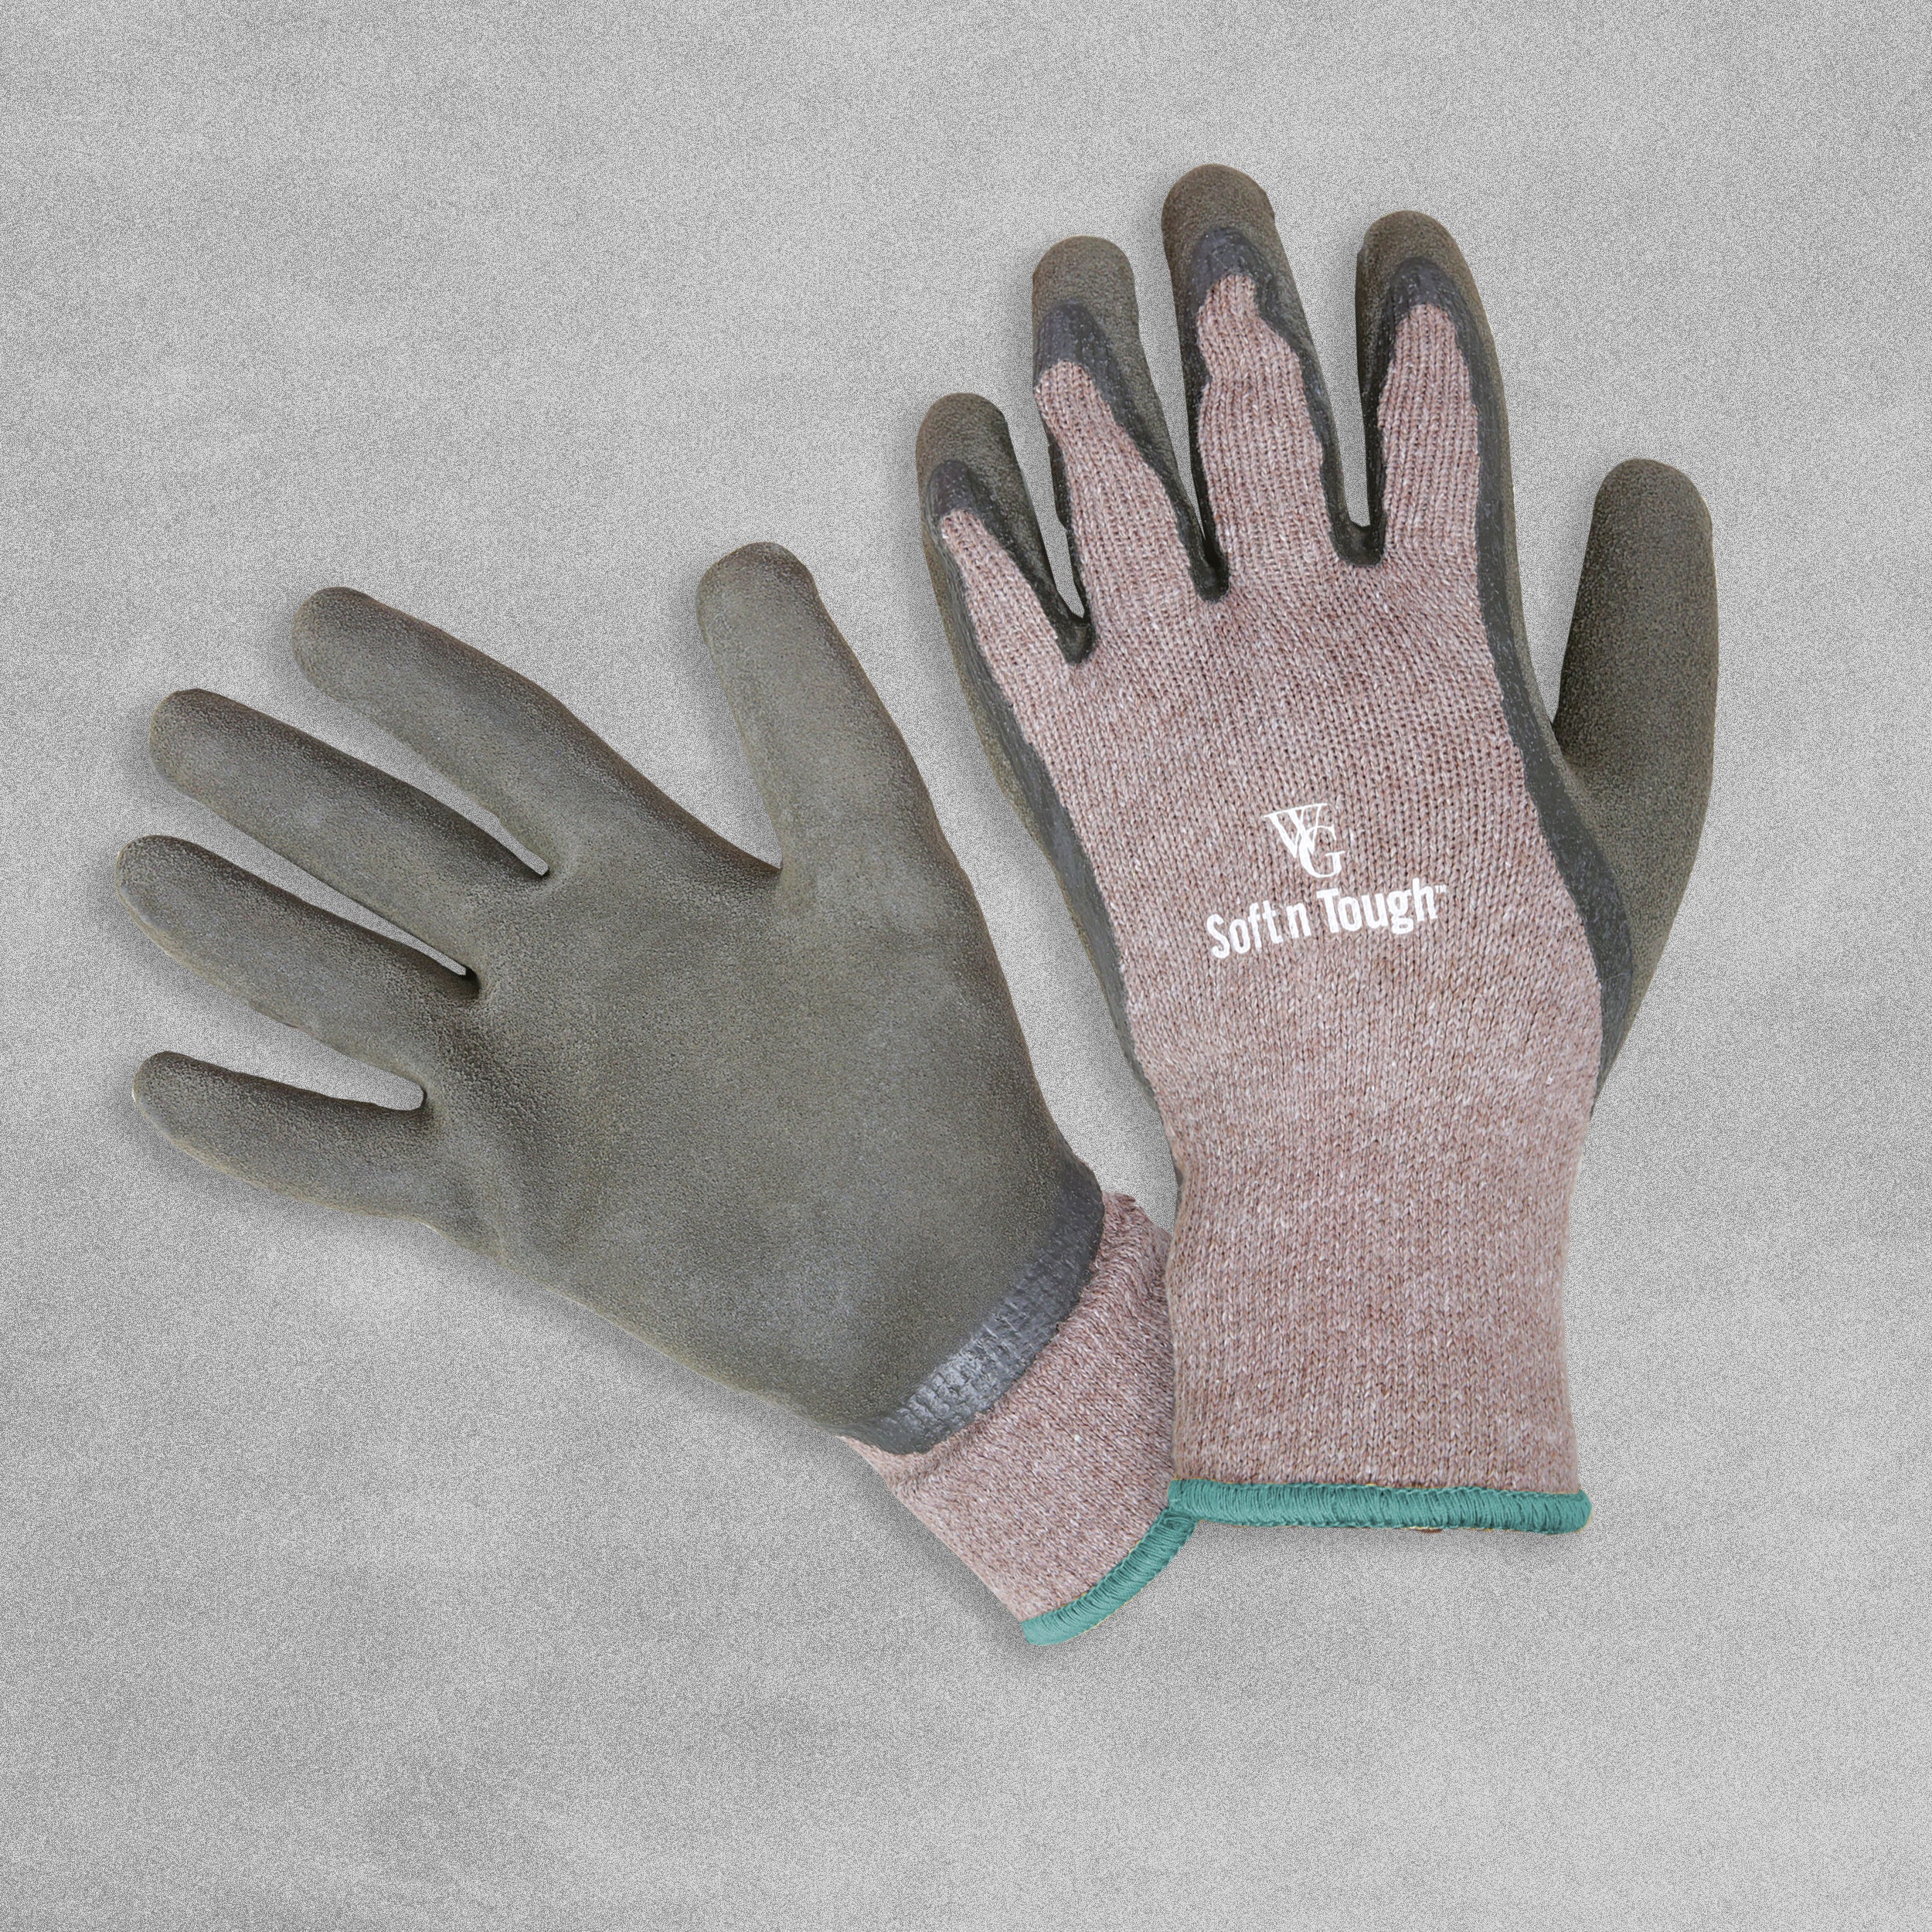 WithGarden Soft and Tough Thermal Gardening Gloves - Brown